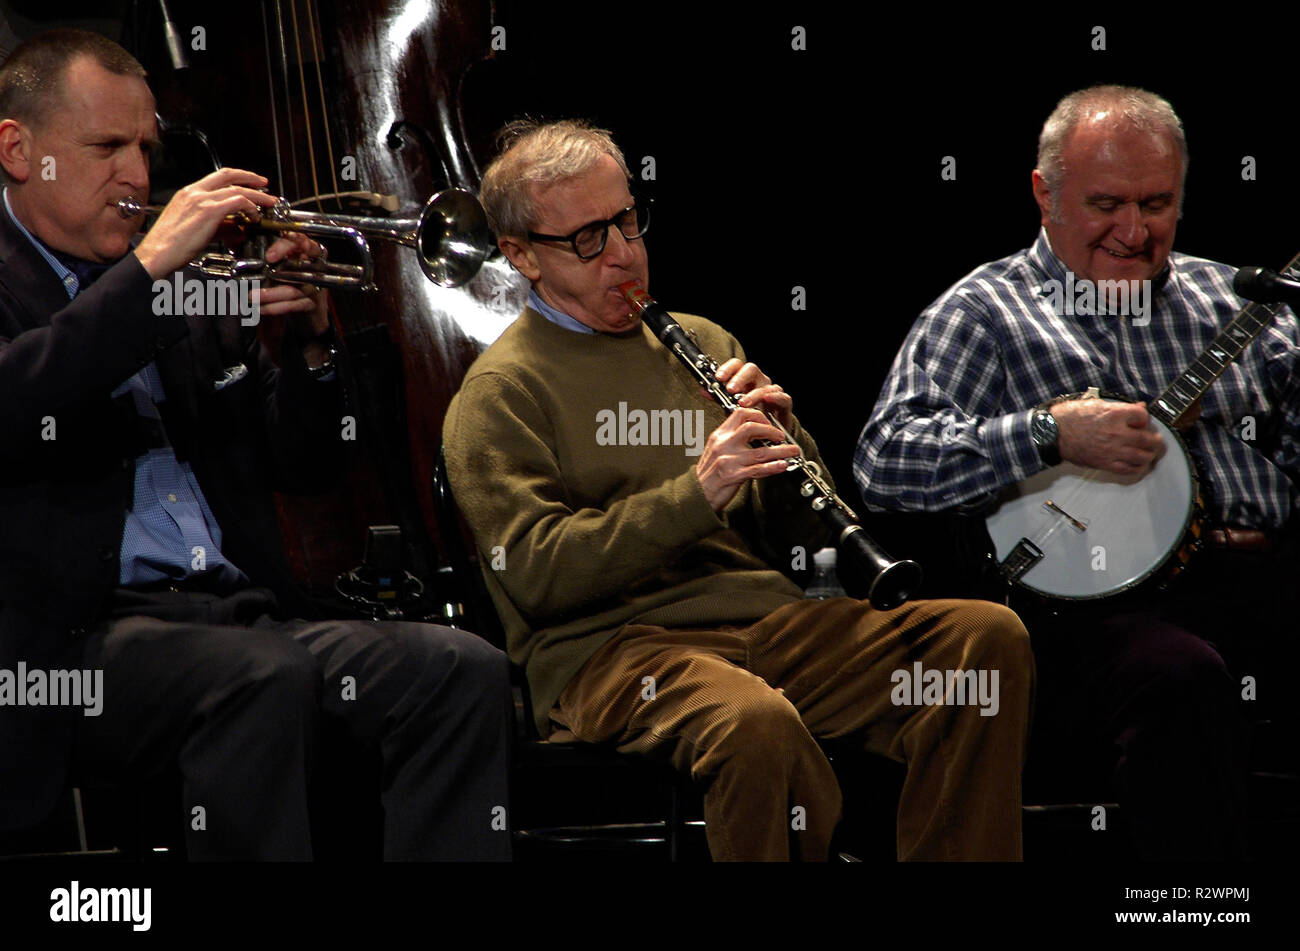 WOODY ALLEN NEW ORLEANS JAZZ BAND MILANO 22 dicembre 200578297 CTT Foto Stock